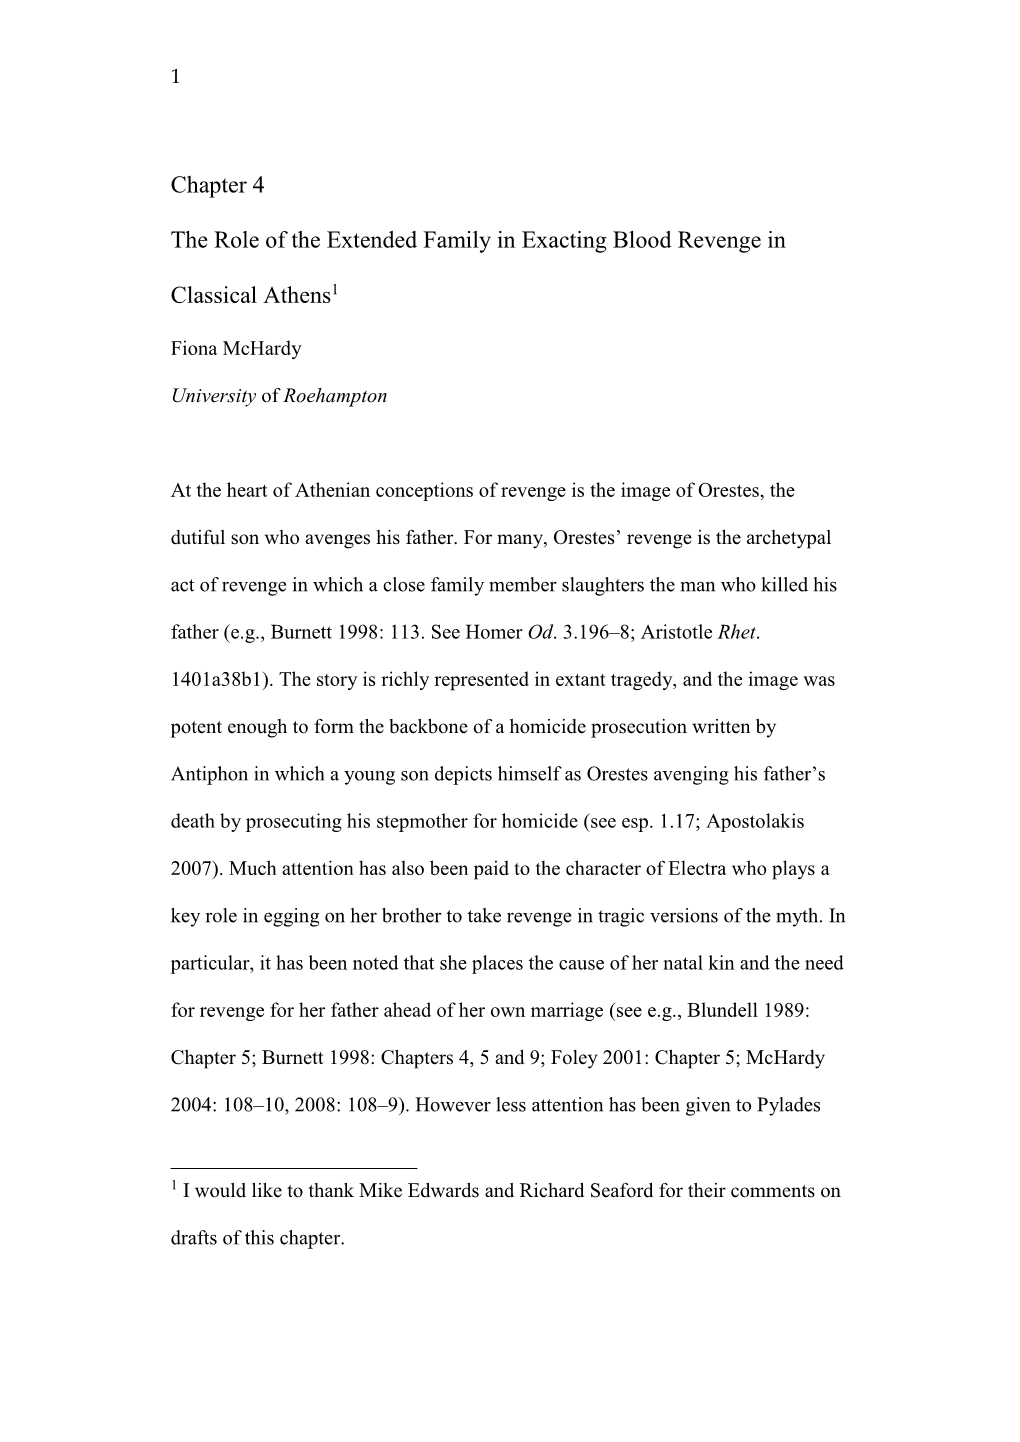 Chapter 4 the Role of the Extended Family in Exacting Blood Revenge